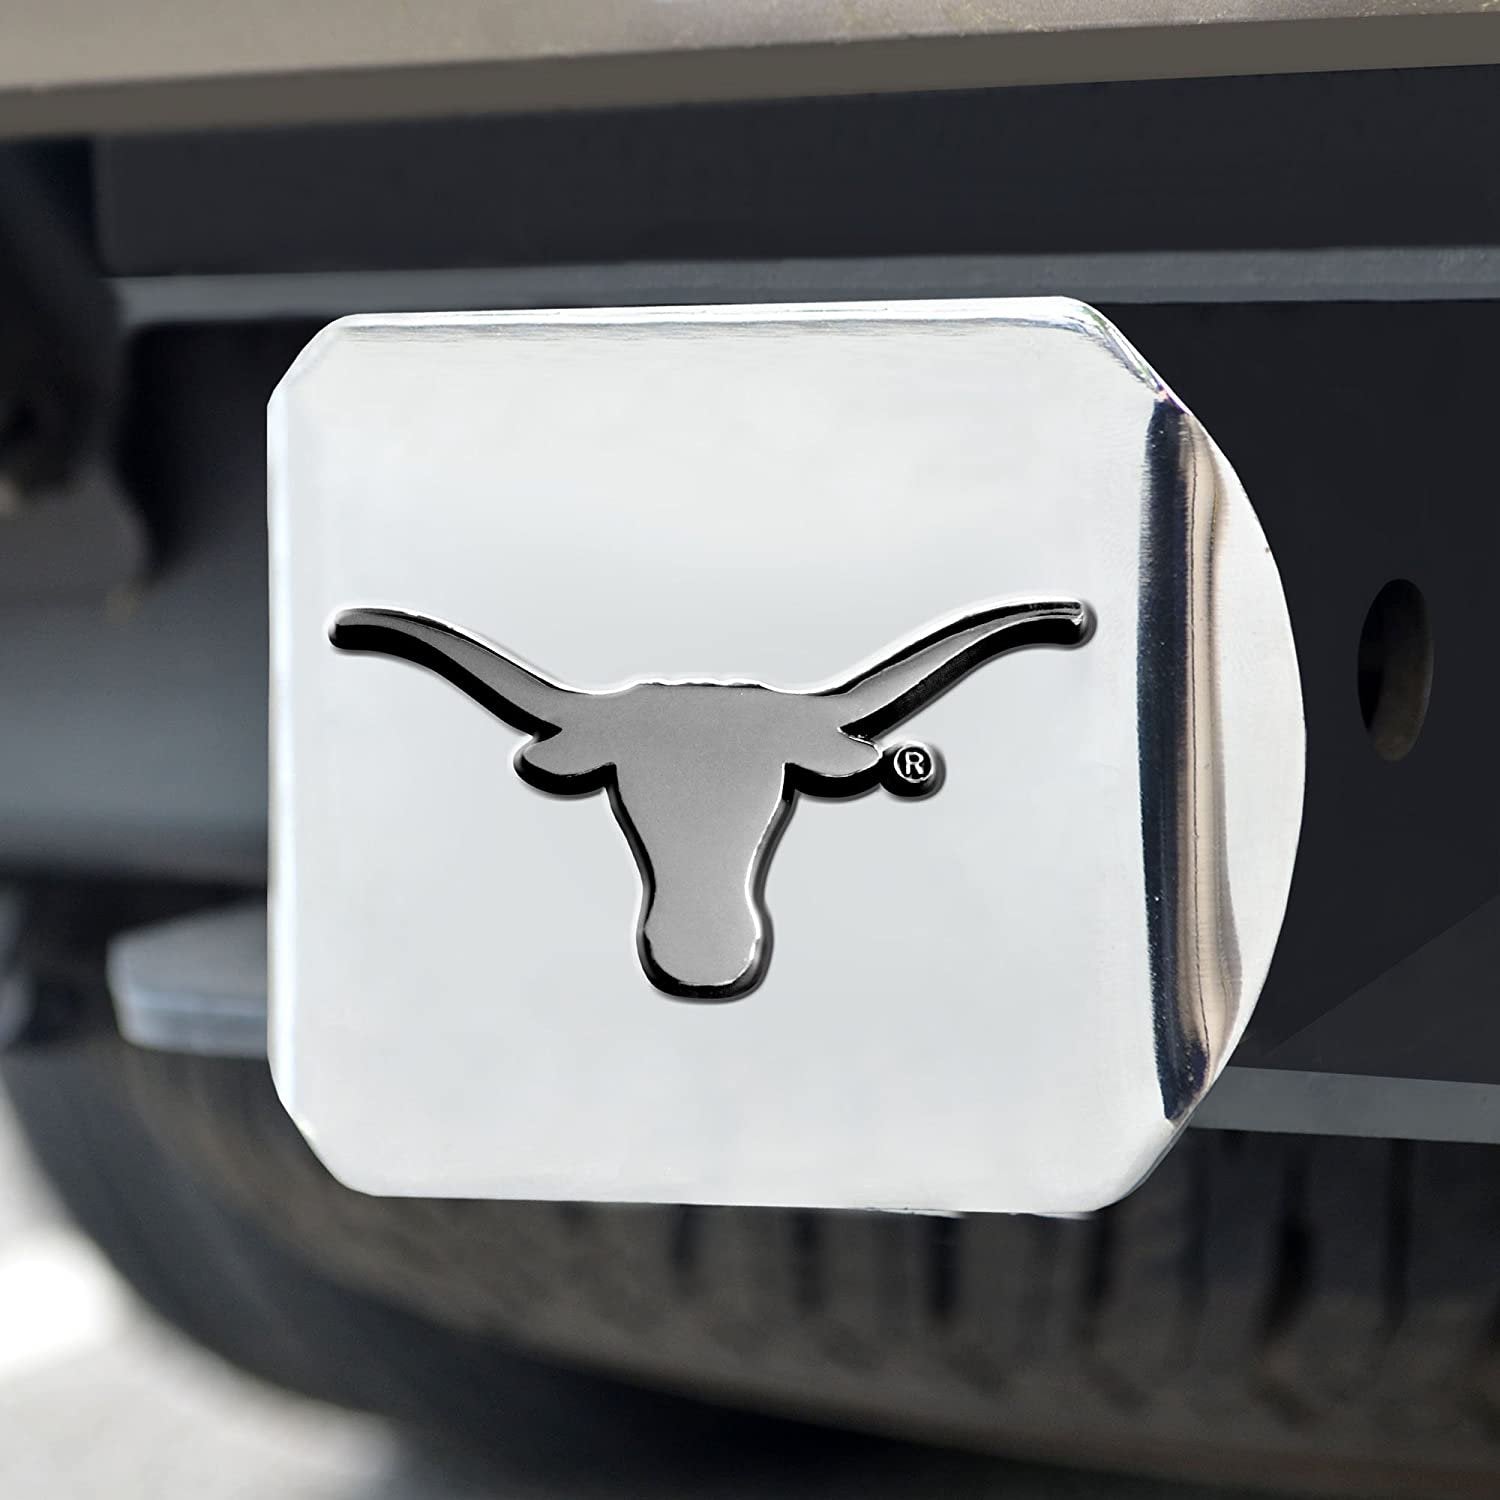 Texas Longhorns Hitch Cover Solid Metal with Raised Chrome Metal Emblem 2" Square Type III University of